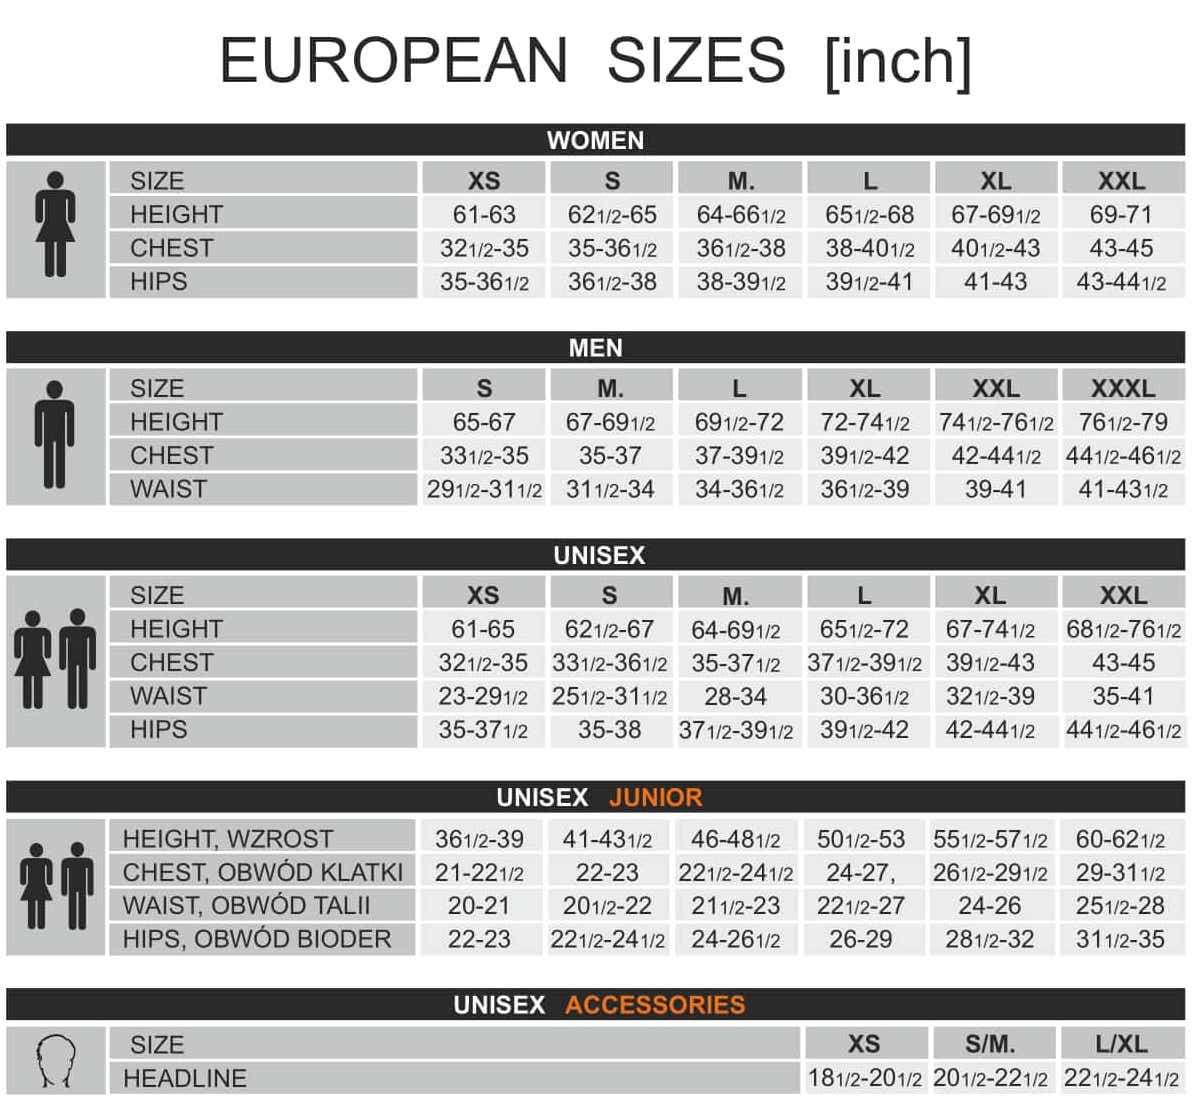 Brubeck Body Guard Size Guide. As a company founded in Europe, our sizing fits snug. Check this chart to ensure you get the perfect fit